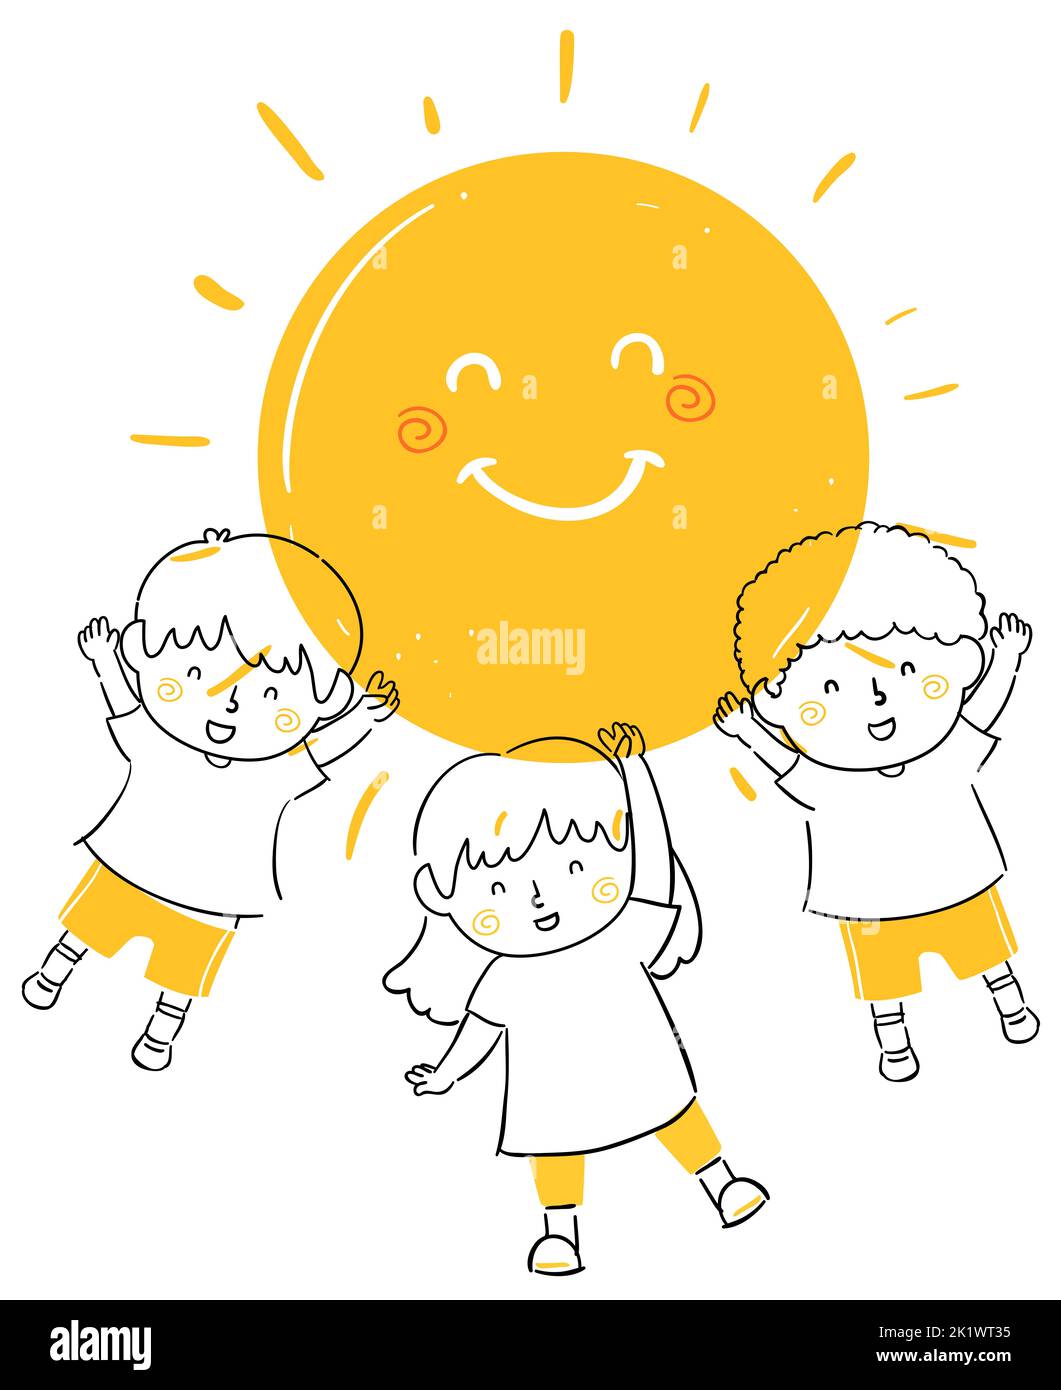 Doodle Illustration of Kids Bringing Sunshine and Waving Hello with a Sun Mascot Shining Behind Them Stock Photo